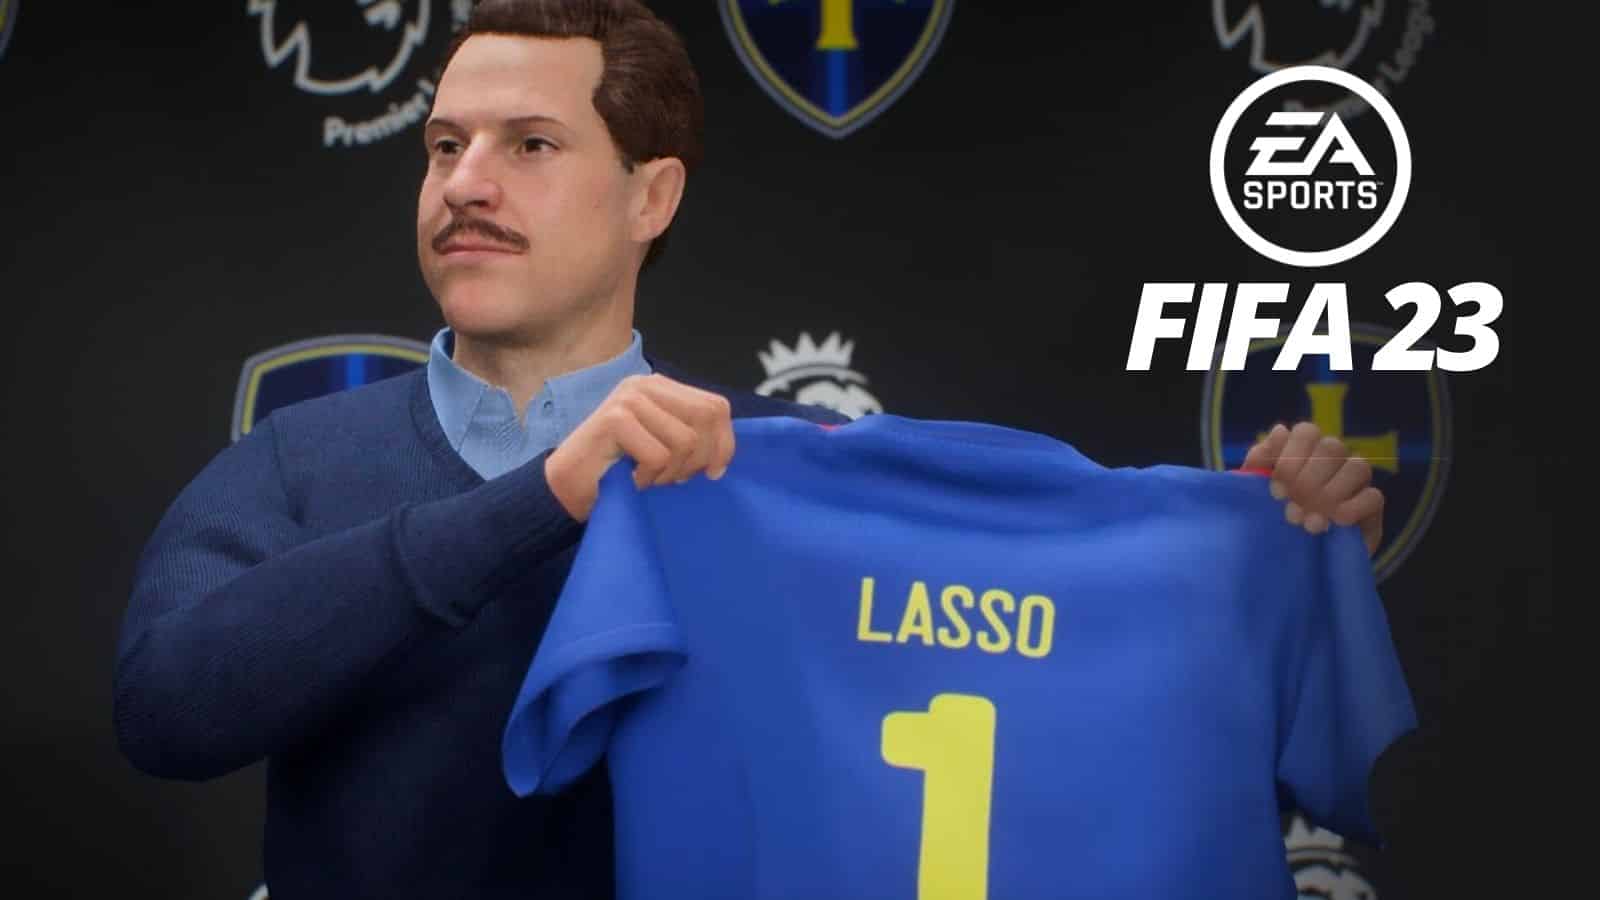 FIFA 23 to Include Ted Lasso and AFC Richmond